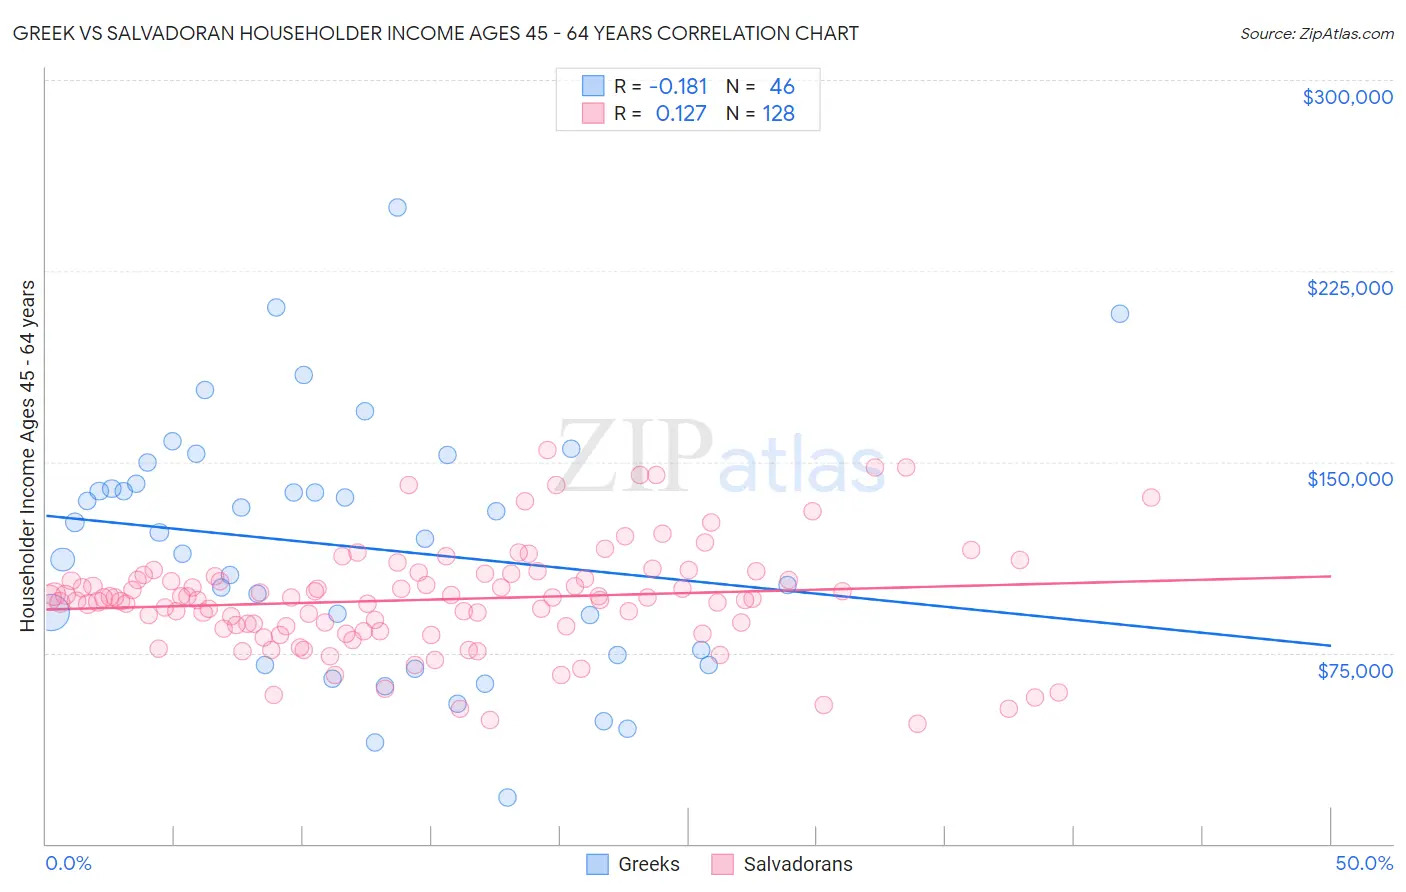 Greek vs Salvadoran Householder Income Ages 45 - 64 years